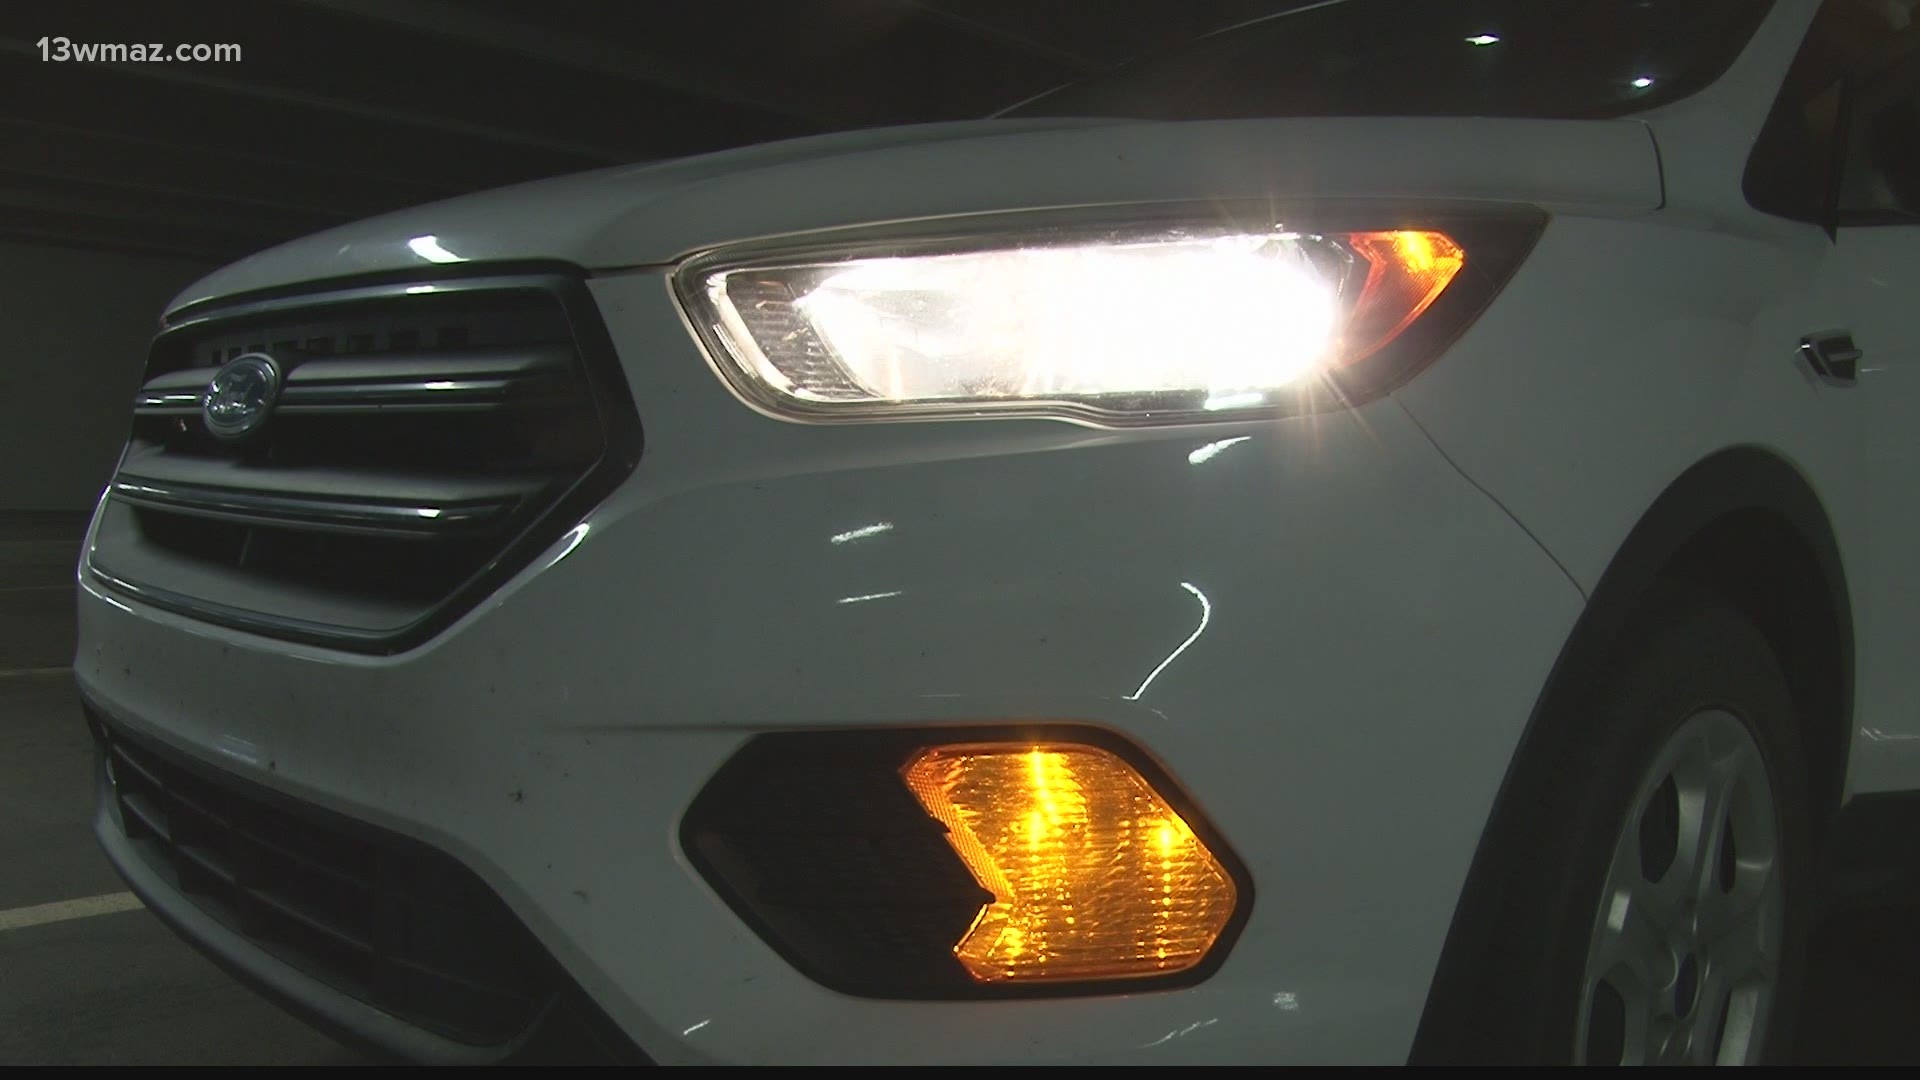 A viewer emailed us asking to clarify what the law is on how to properly use high beam headlights.